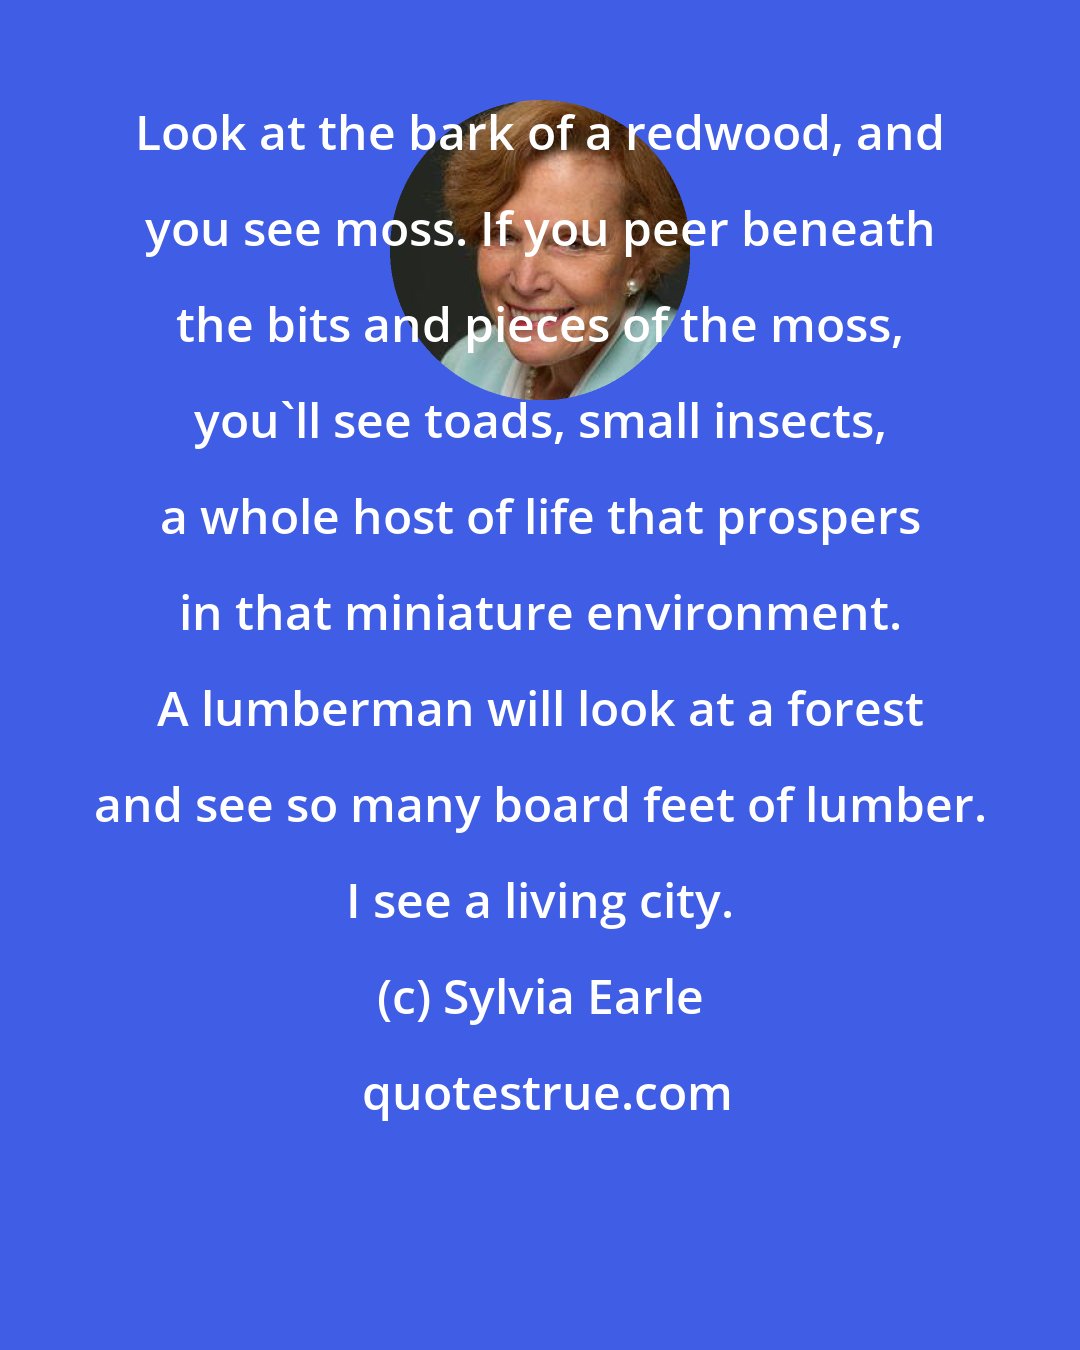 Sylvia Earle: Look at the bark of a redwood, and you see moss. If you peer beneath the bits and pieces of the moss, you'll see toads, small insects, a whole host of life that prospers in that miniature environment. A lumberman will look at a forest and see so many board feet of lumber. I see a living city.